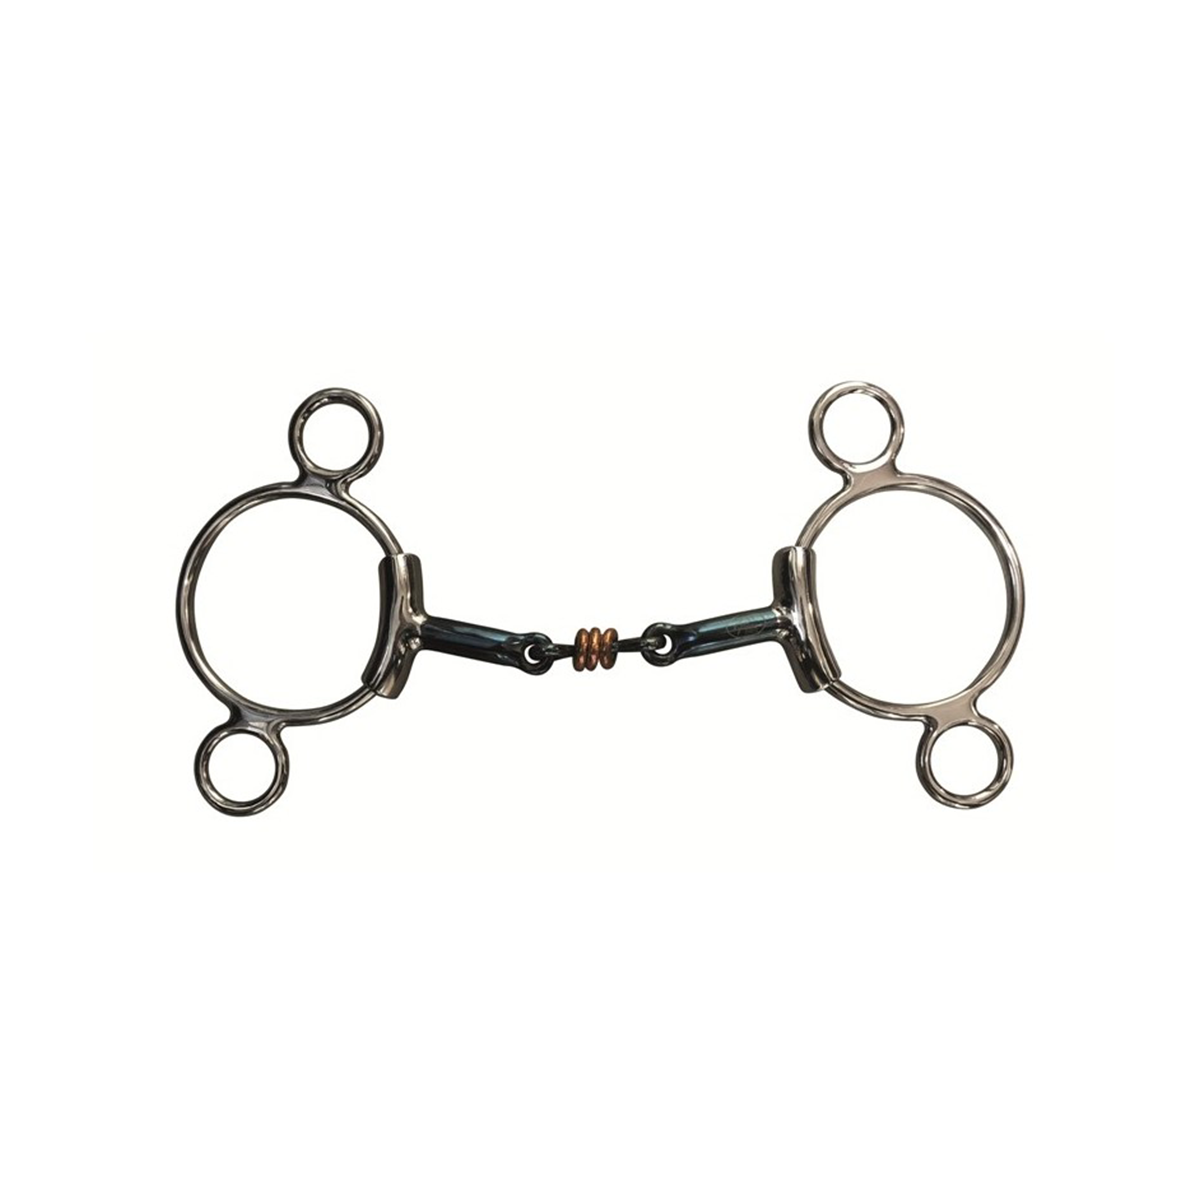 Jump'in Double Jointed Blue Steel with Copper Rings 3-Ring Bit